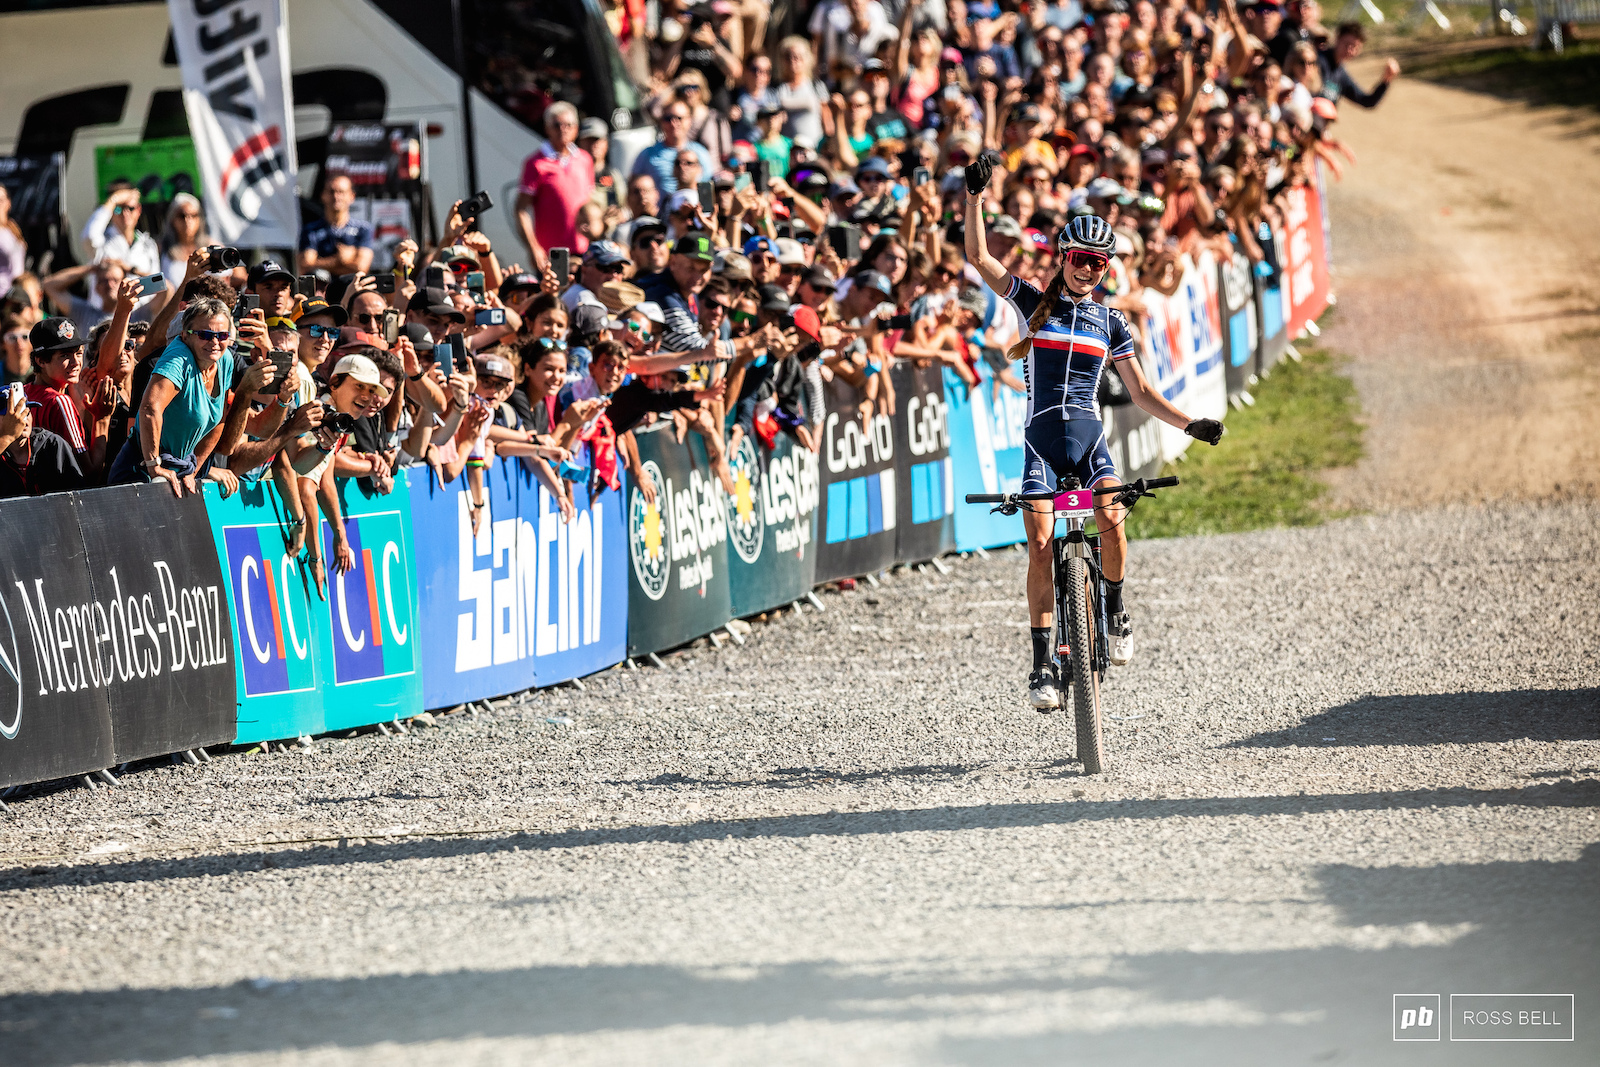 Line Burquier overjoyed to take her first U23 World Champs title.